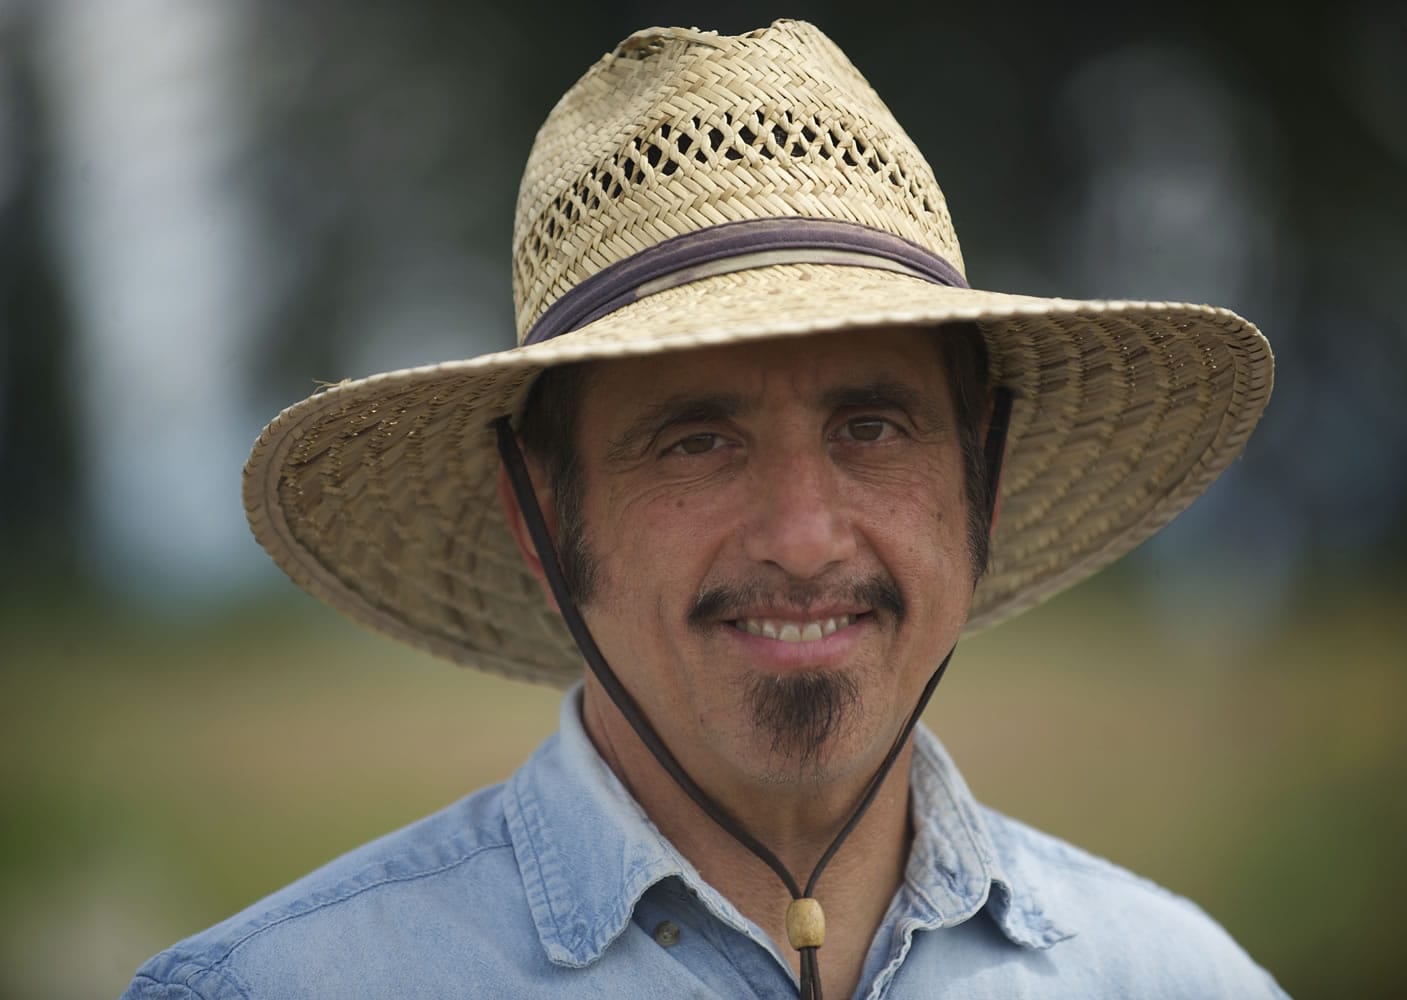 Lyle Stanley owns Gee Creek Farm near Ridgefield, and enjoys watching people learn about farming.